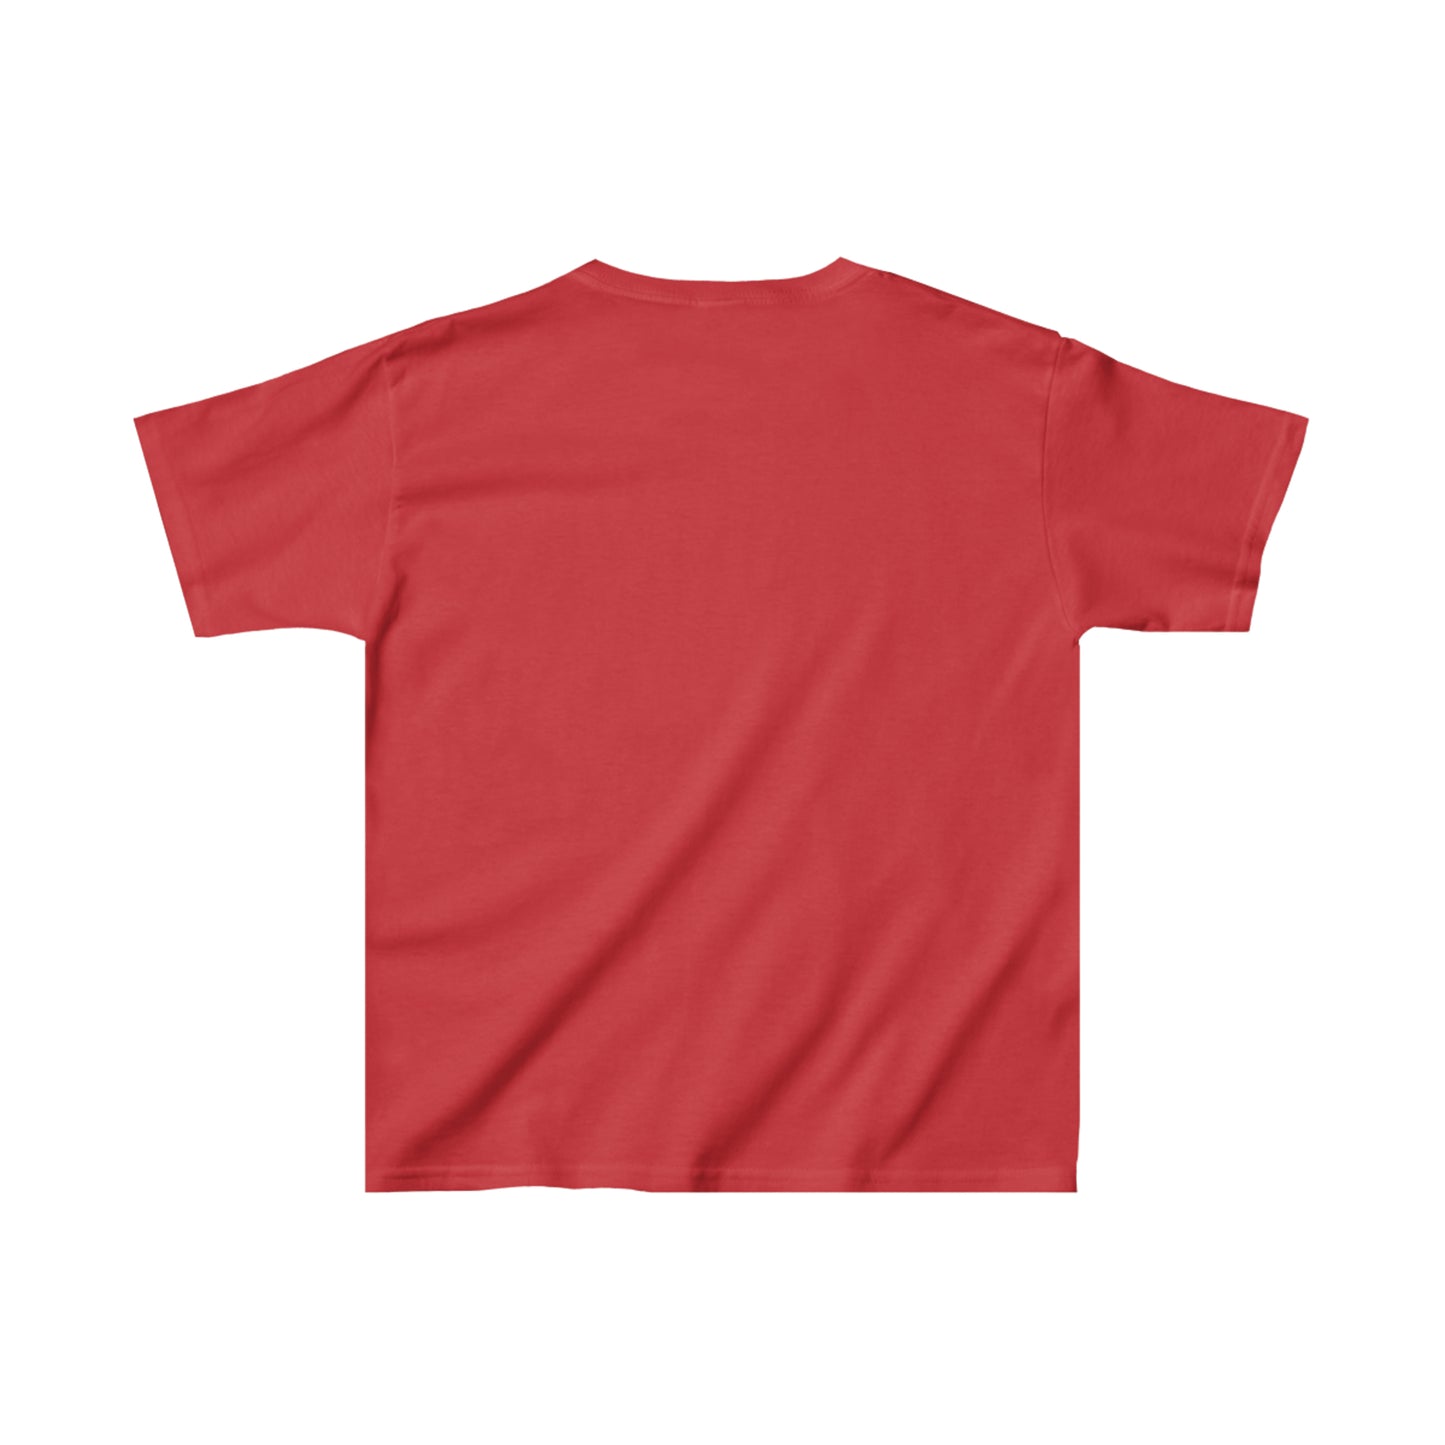 a red t - shirt on a white background